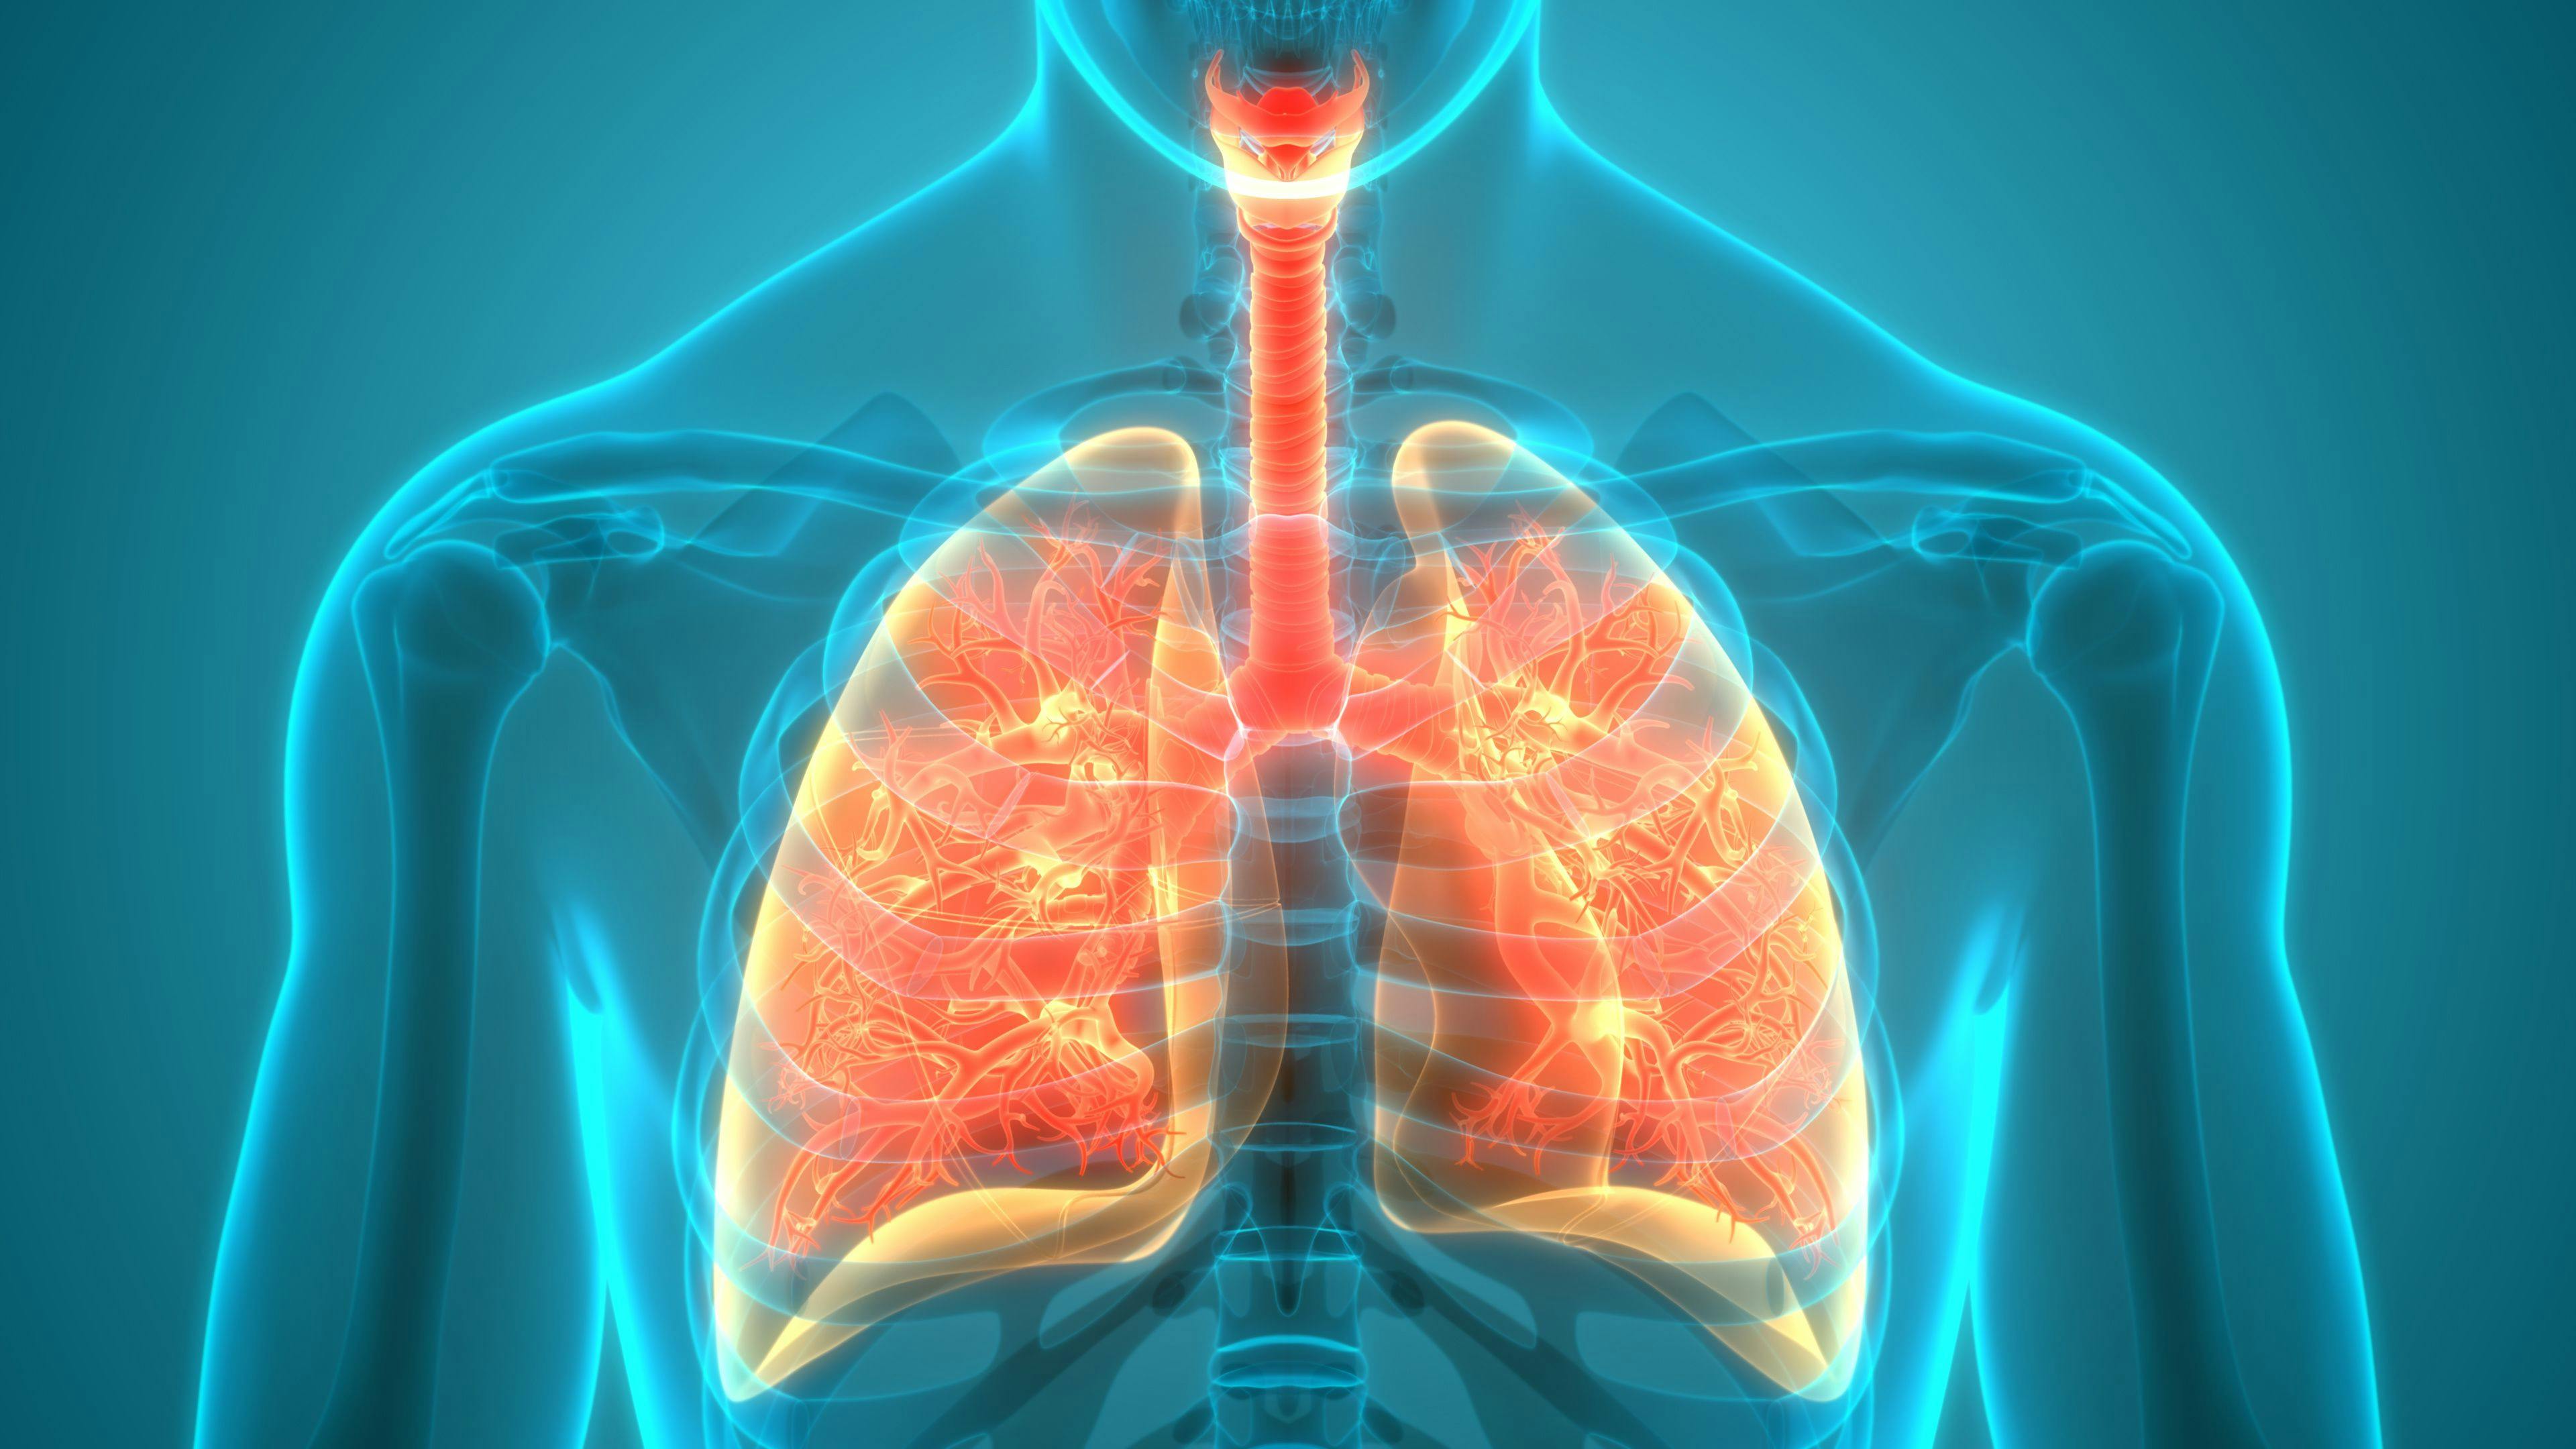 Findings from the phase 3 CONTACT-01 trial indicated that cabozantinib and atezolizumab did not reach the primary end point of overall survival in patients with metastatic non–small cell lung cancer.